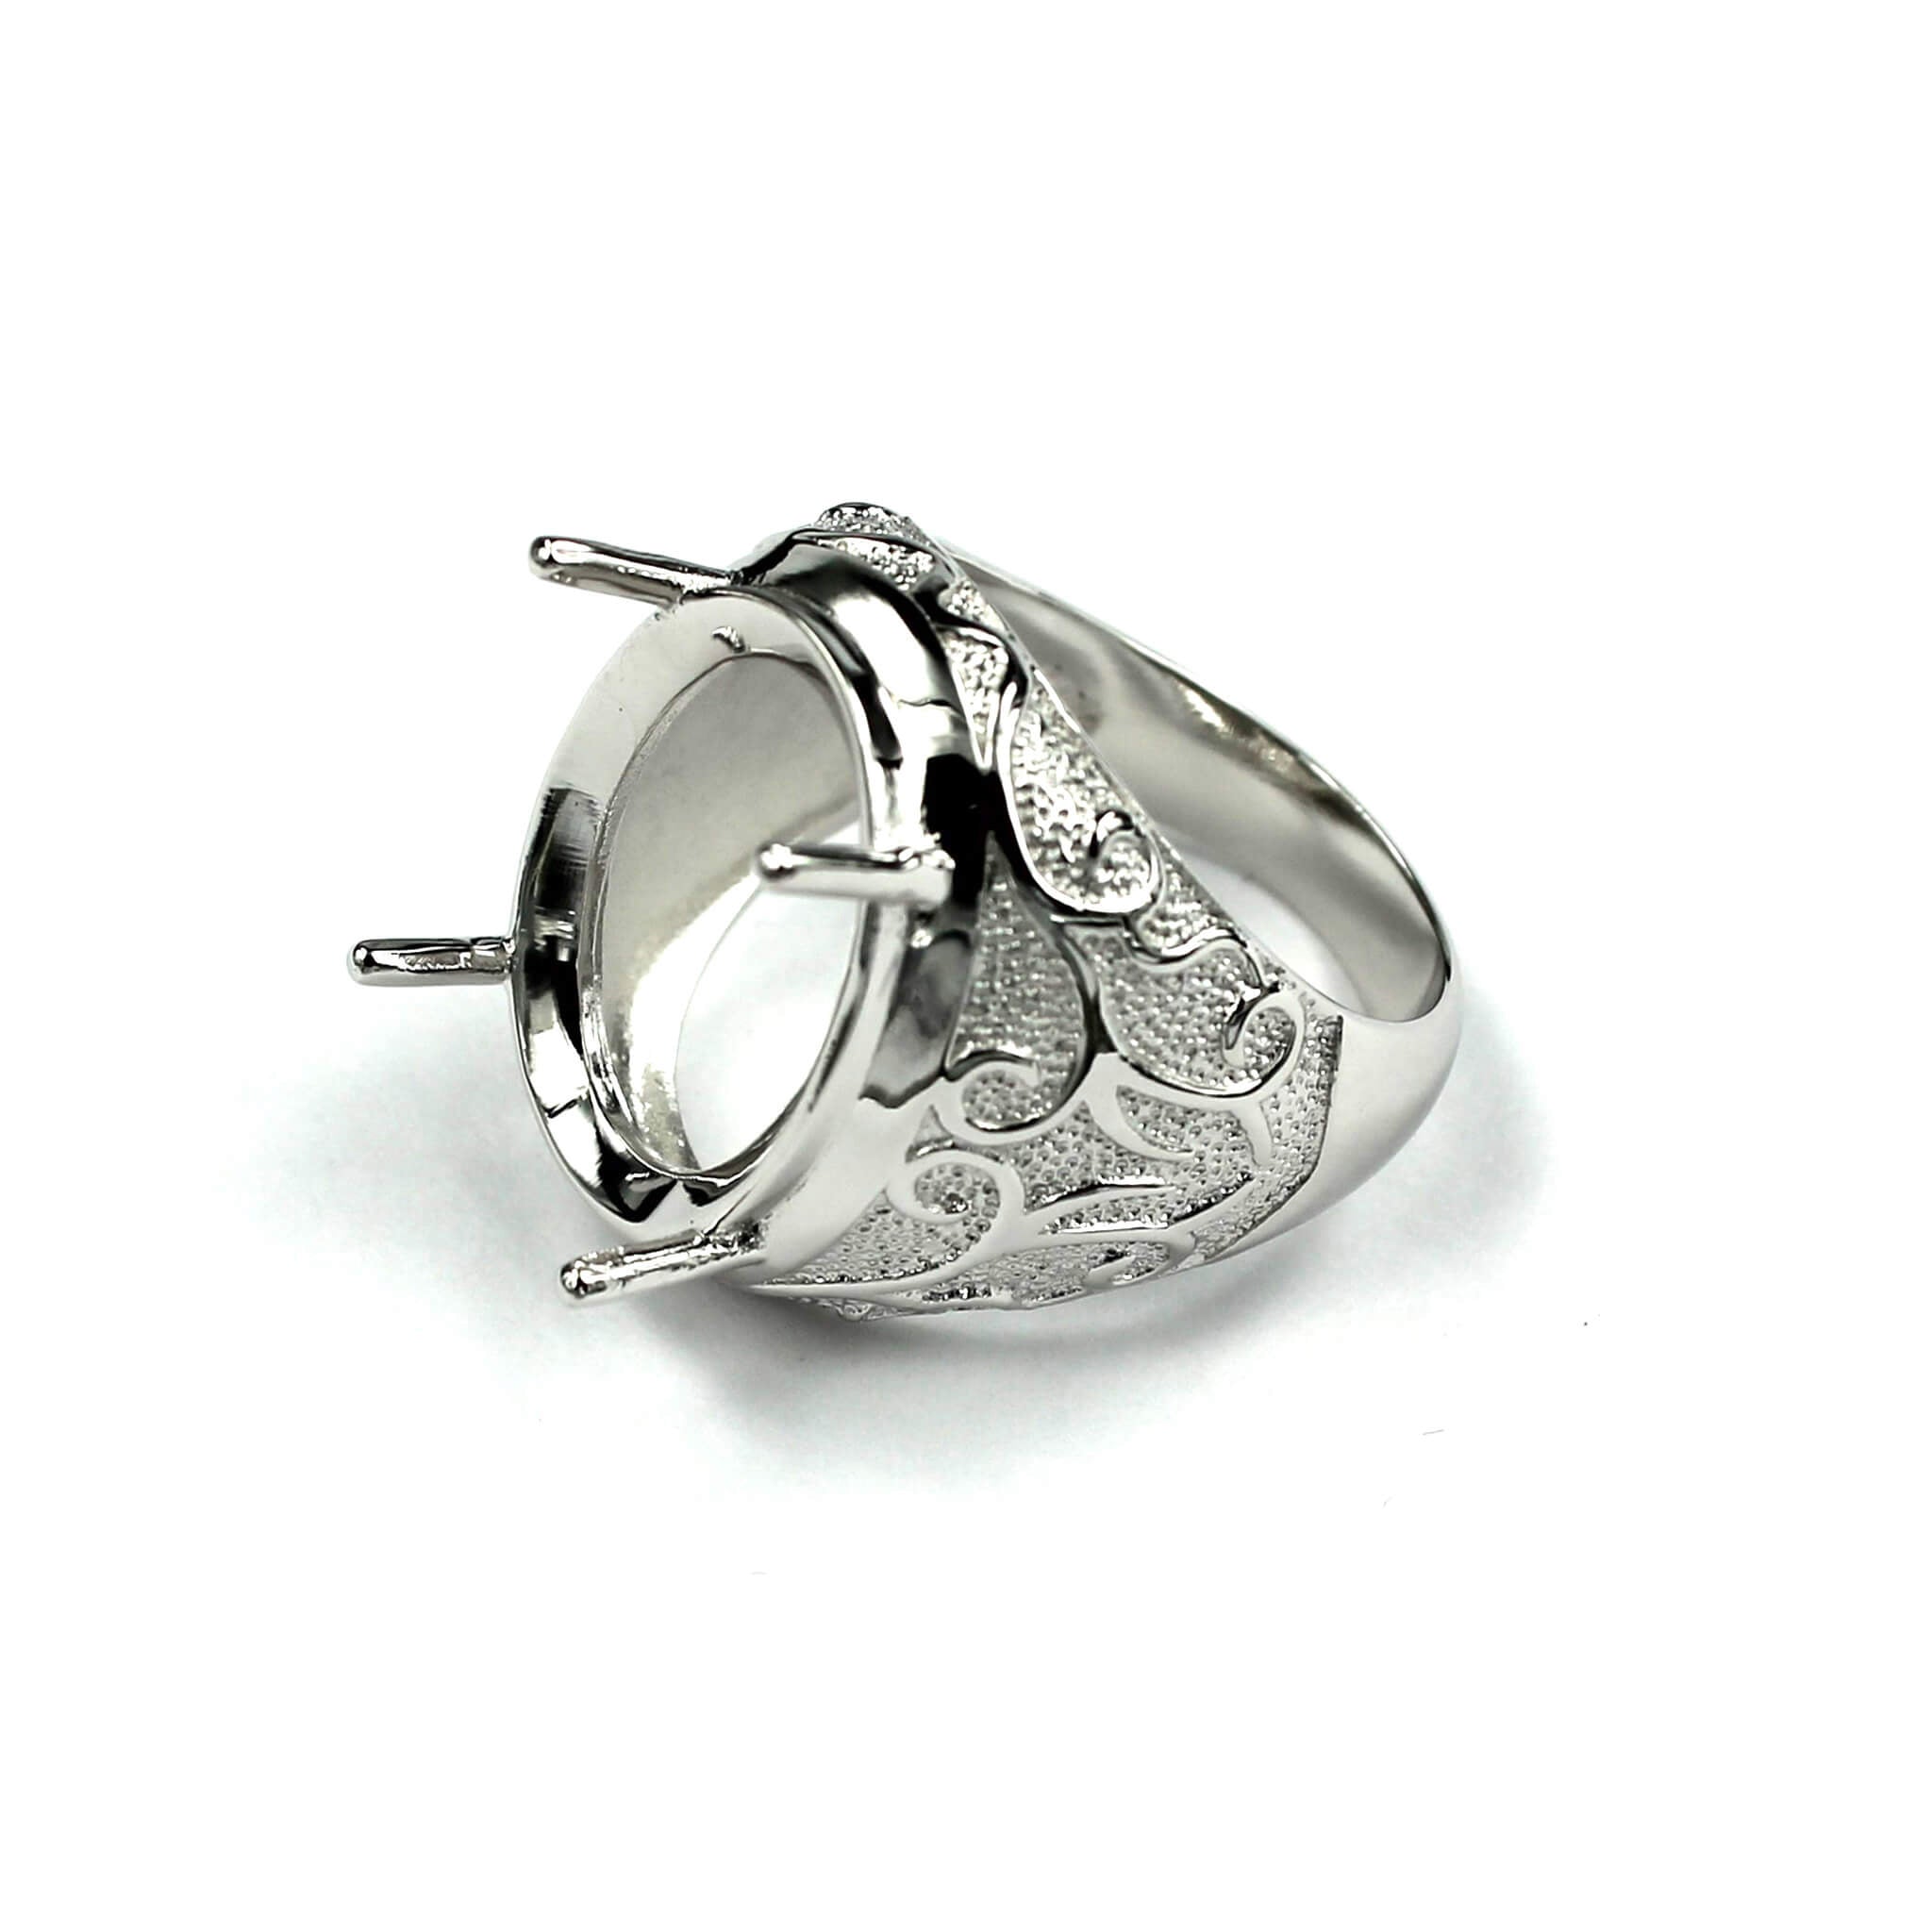 Swirls Patterned Ring with Oval Prong Setting in Sterling Silver 17x22mm